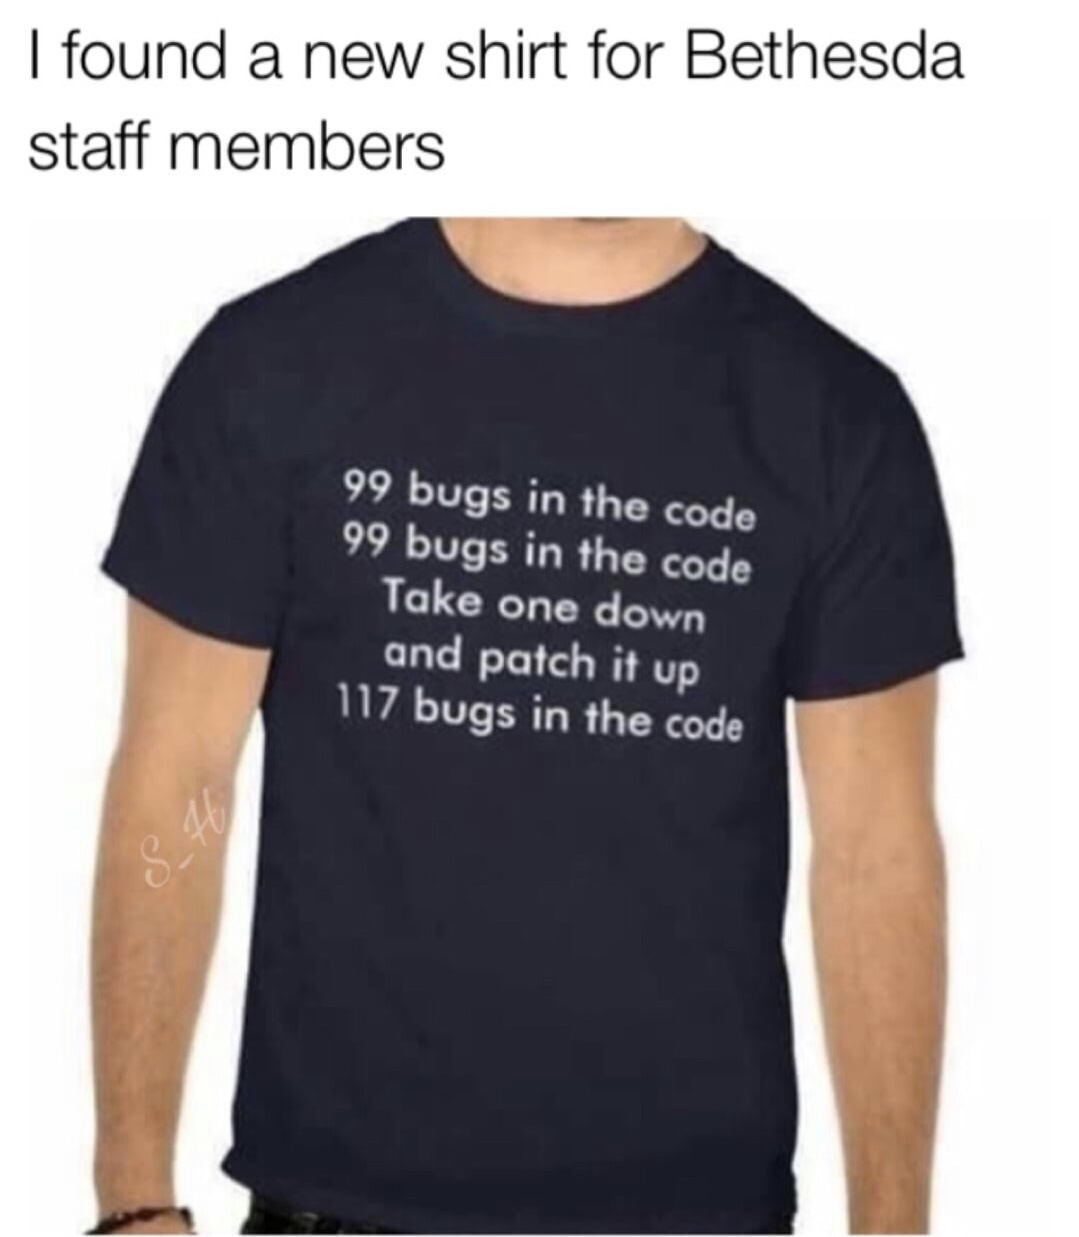 memes - chess club t shirt ideas - I found a new shirt for Bethesda staff members 99 bugs in the code 99 bugs in the code Take one down and patch it up 117 bugs in the code